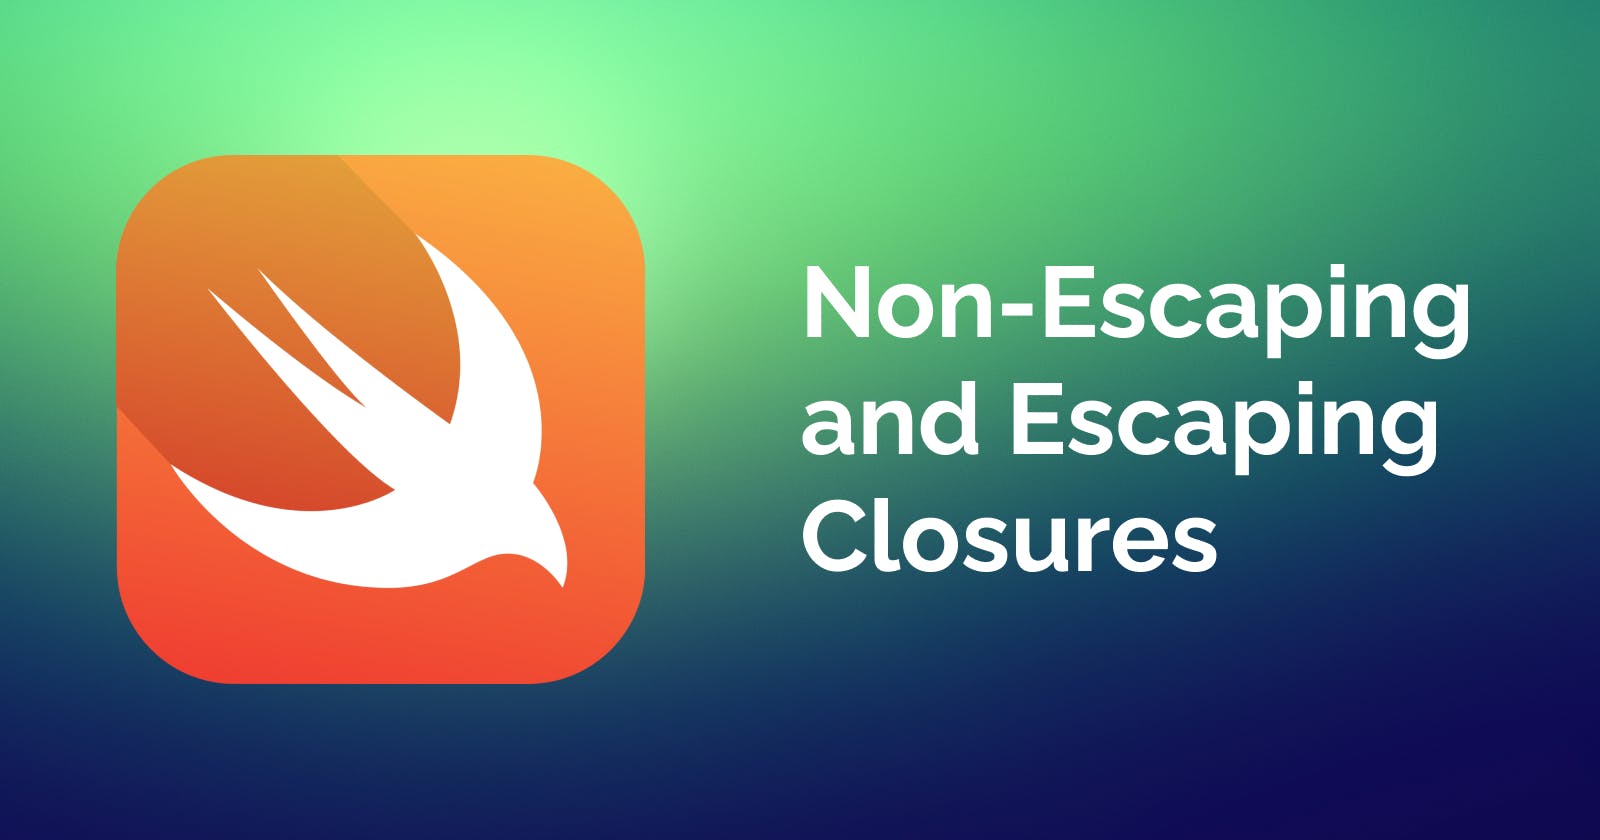 Difference between Non-Escaping and Escaping Closures in Swift